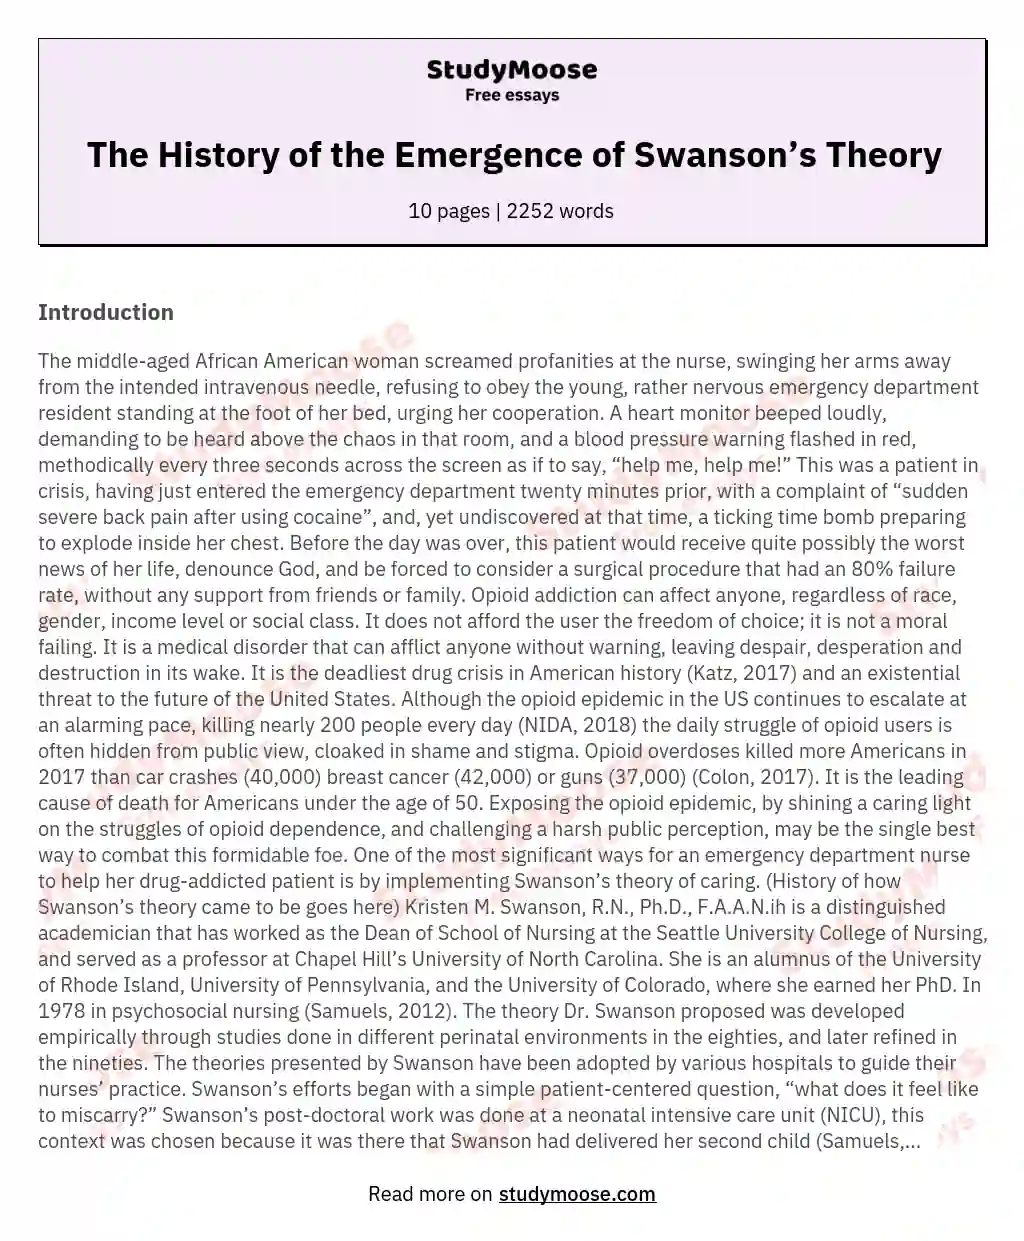 The History of the Emergence of Swanson’s Theory essay